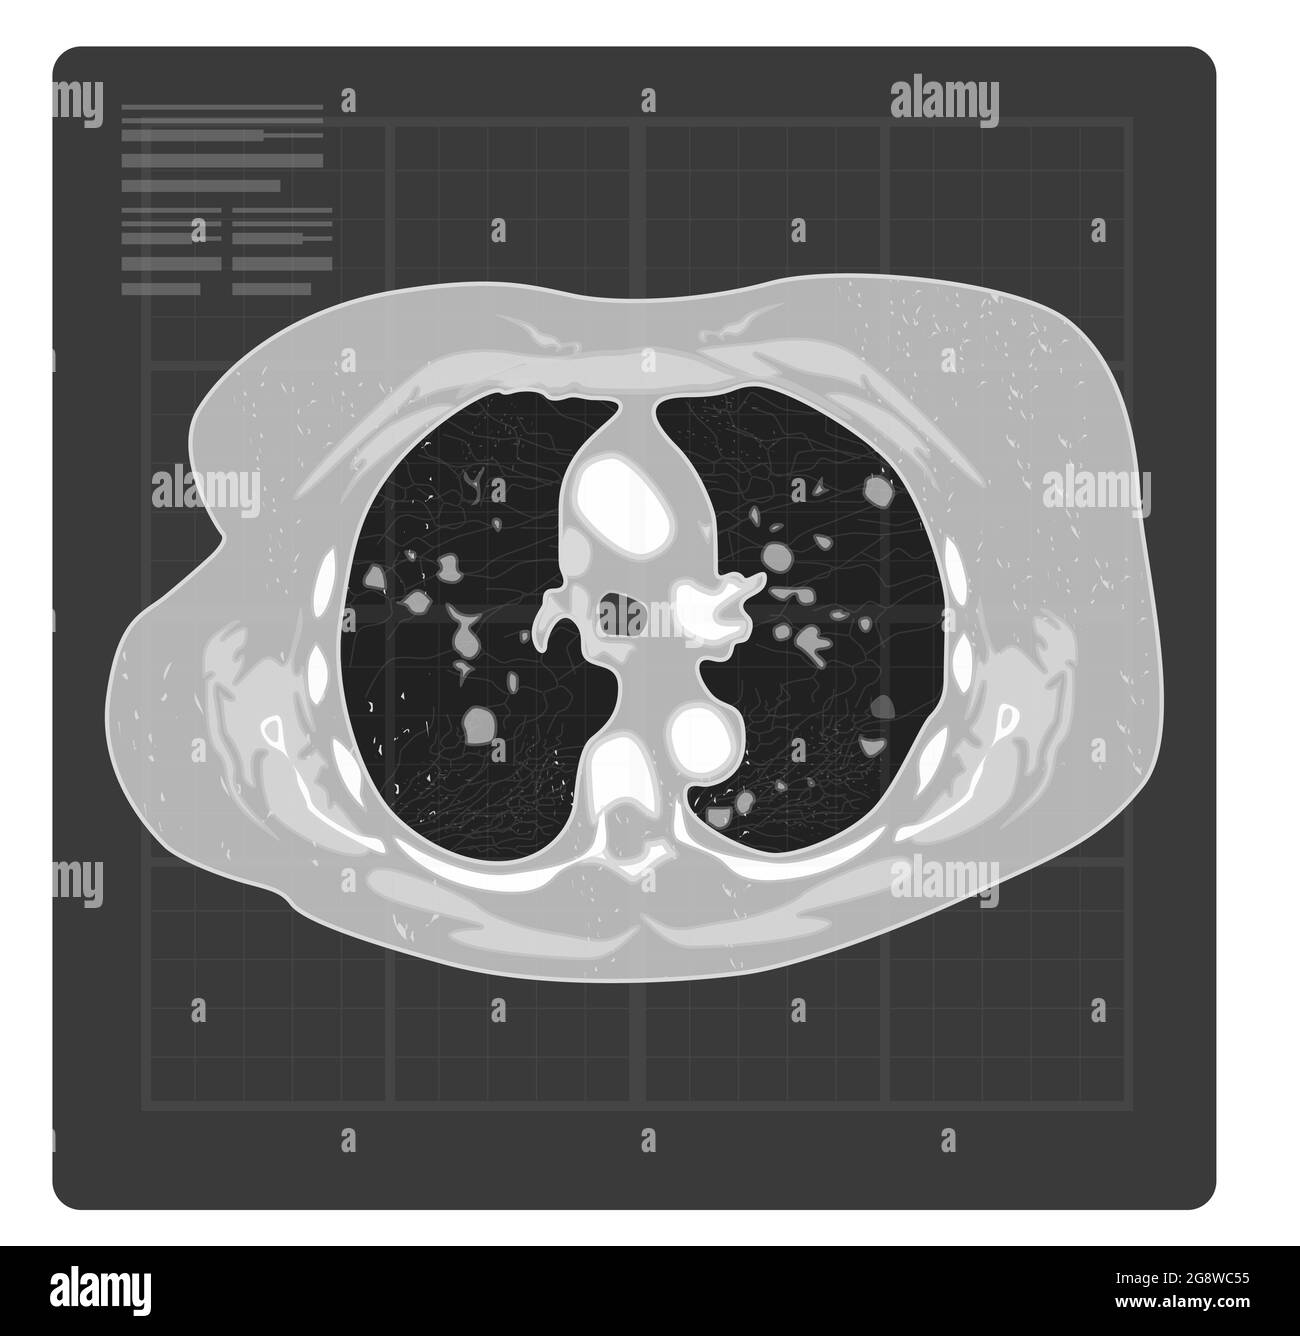 Covid-19 Testing - Human Lungs X-Ray - Illustration as EPS 10 File Stock Vector